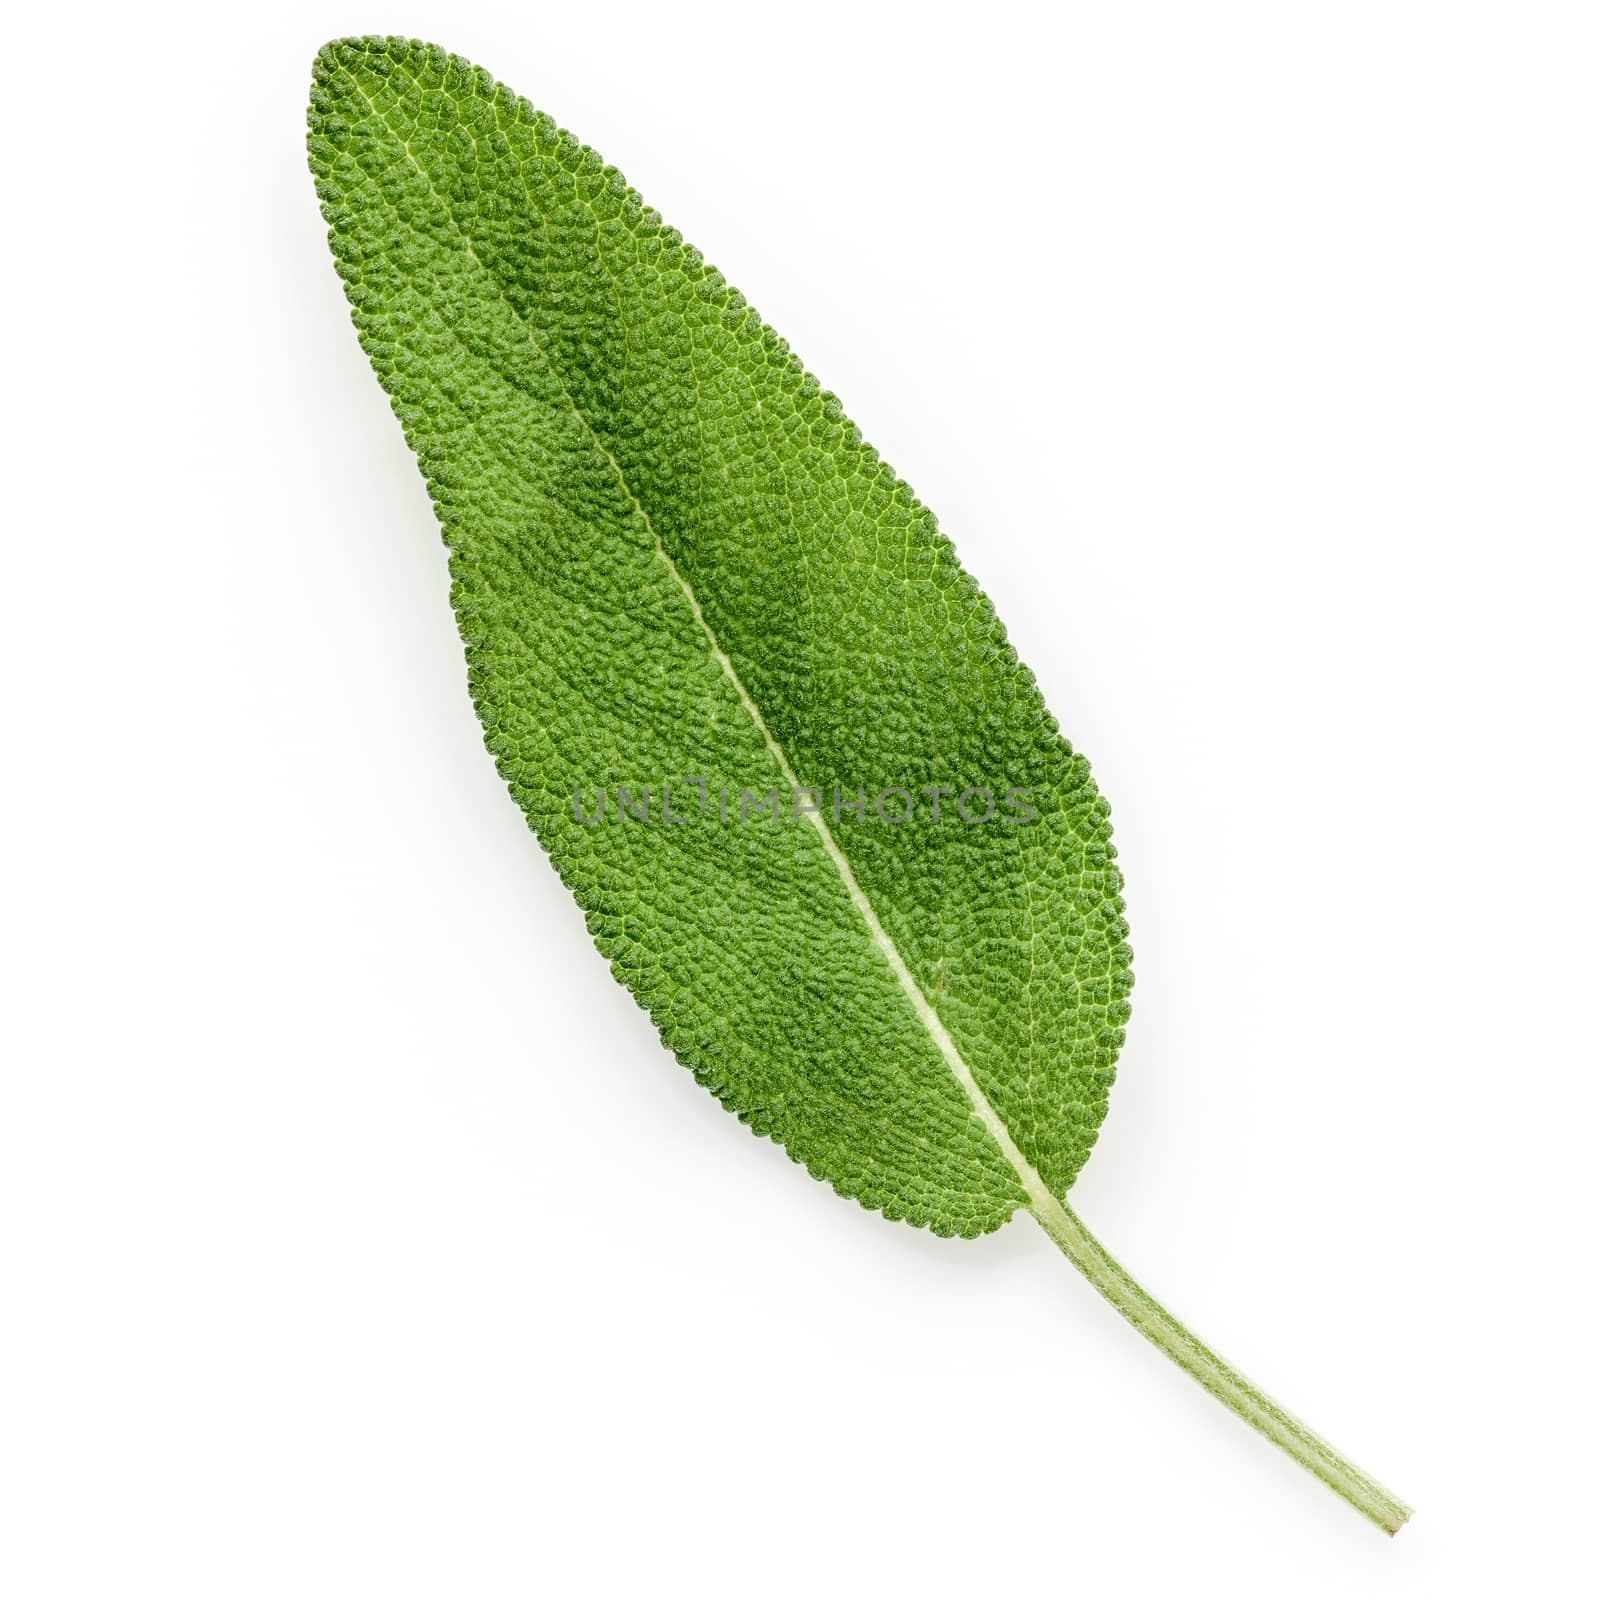 Closeup of single fresh sage leaves isolated on white background by kerdkanno